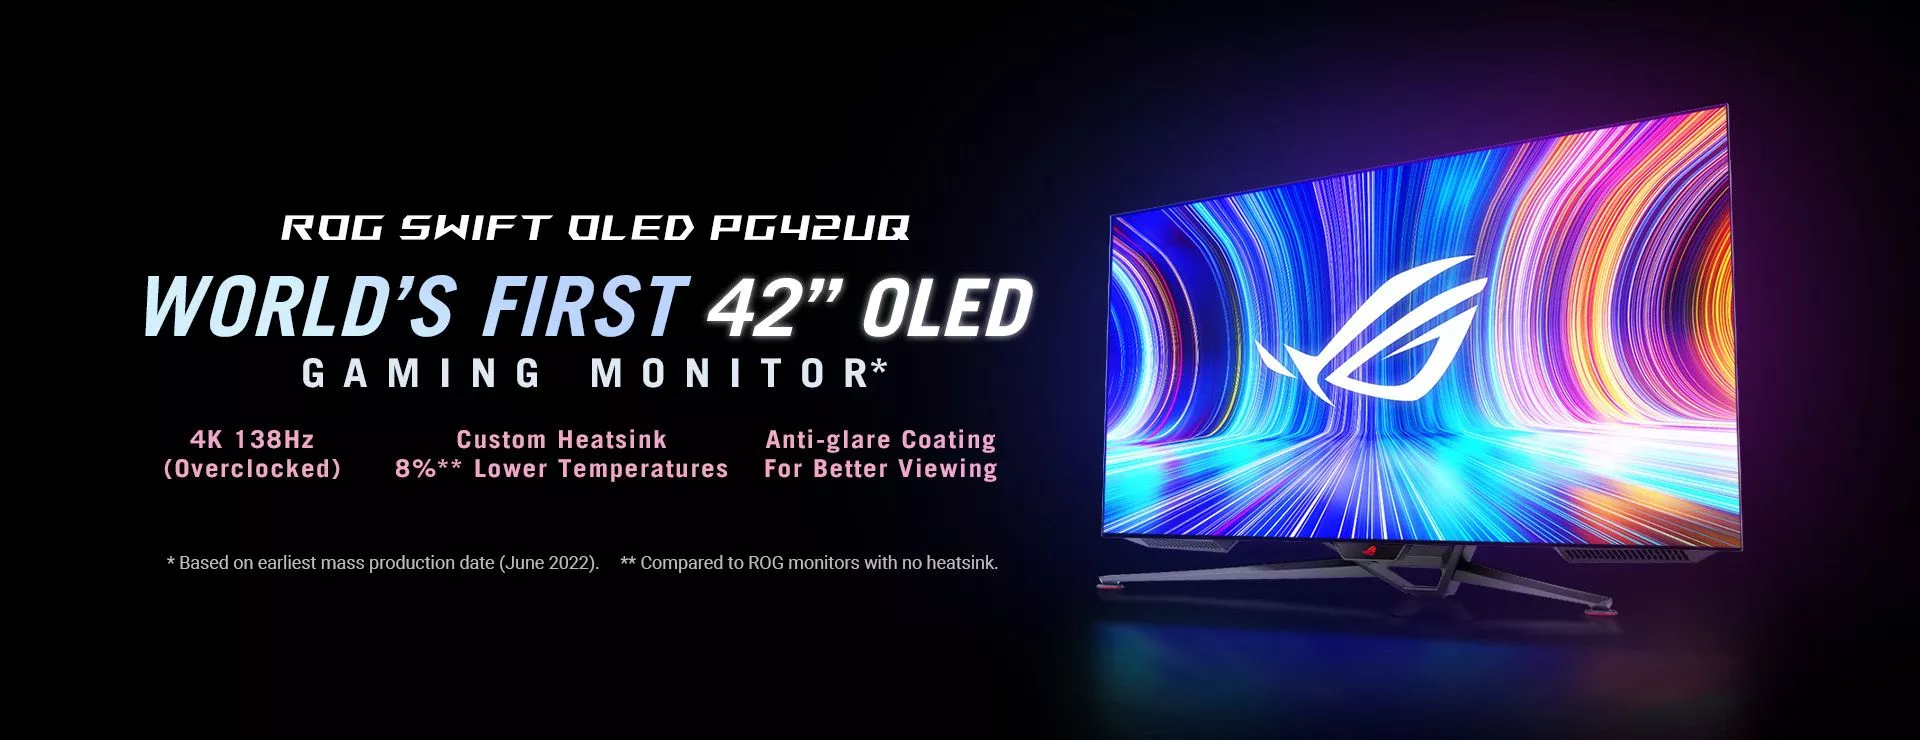 ROG Swift OLED PG42UQ World's First 42" OLED Gaming Monitor 4K 138Hz (Overclocked) Custom Heatsink 8%** Lower Temperatures Anti-glare Coating For Better Viewing * Based on earliest mass production date (June 2022).  **Compared to ROG monitors with no heatsink.